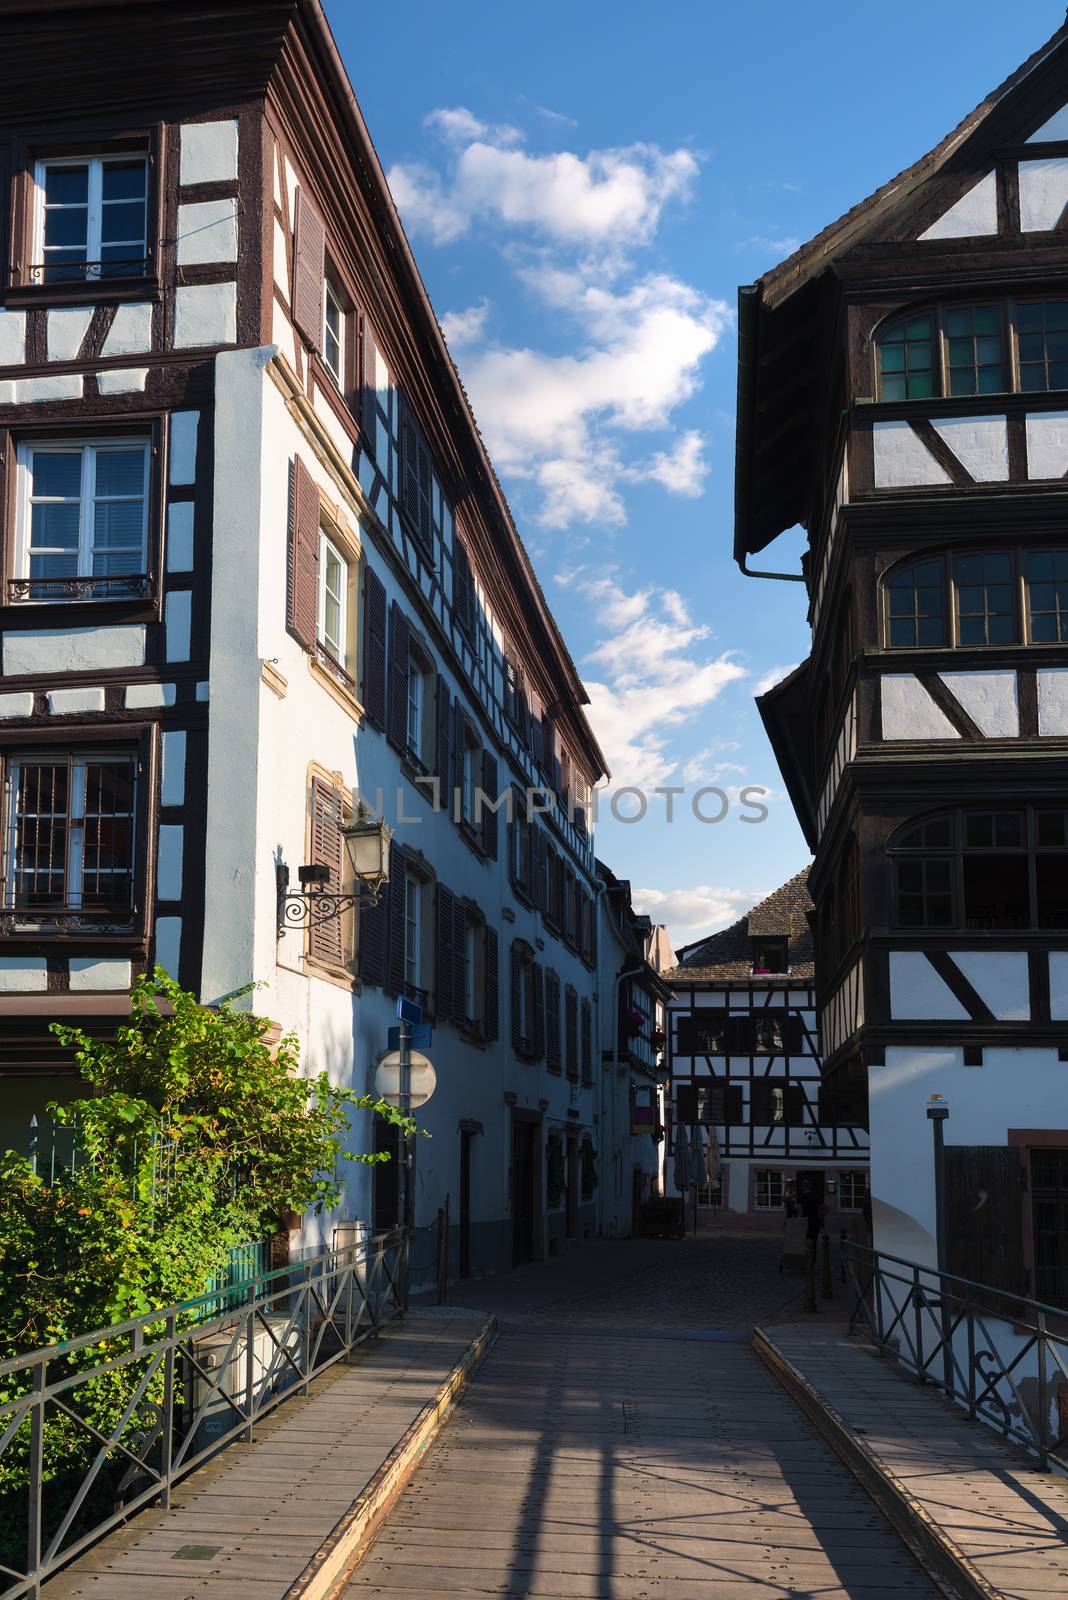 Picturesque district Petite France in Strasbourg. France